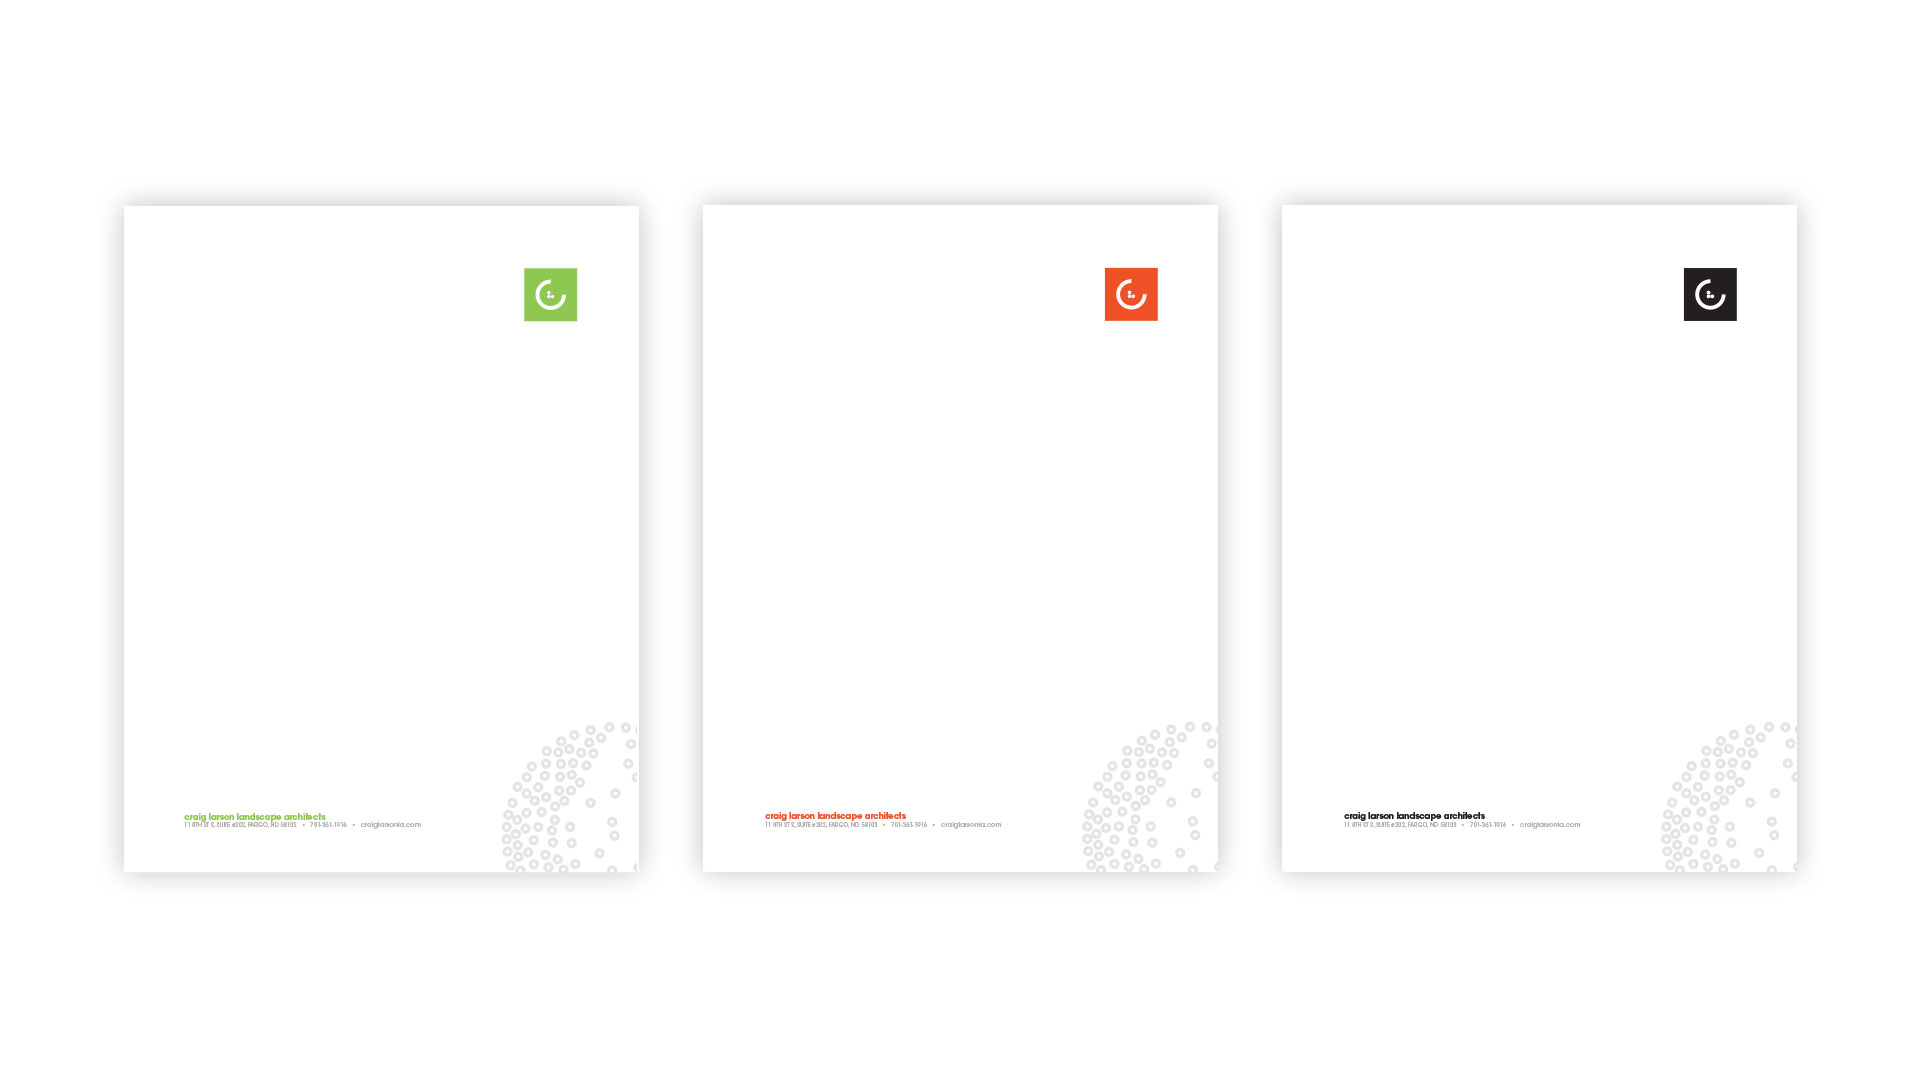 Green, red-orange, and black versions of CLLA branded letterhead